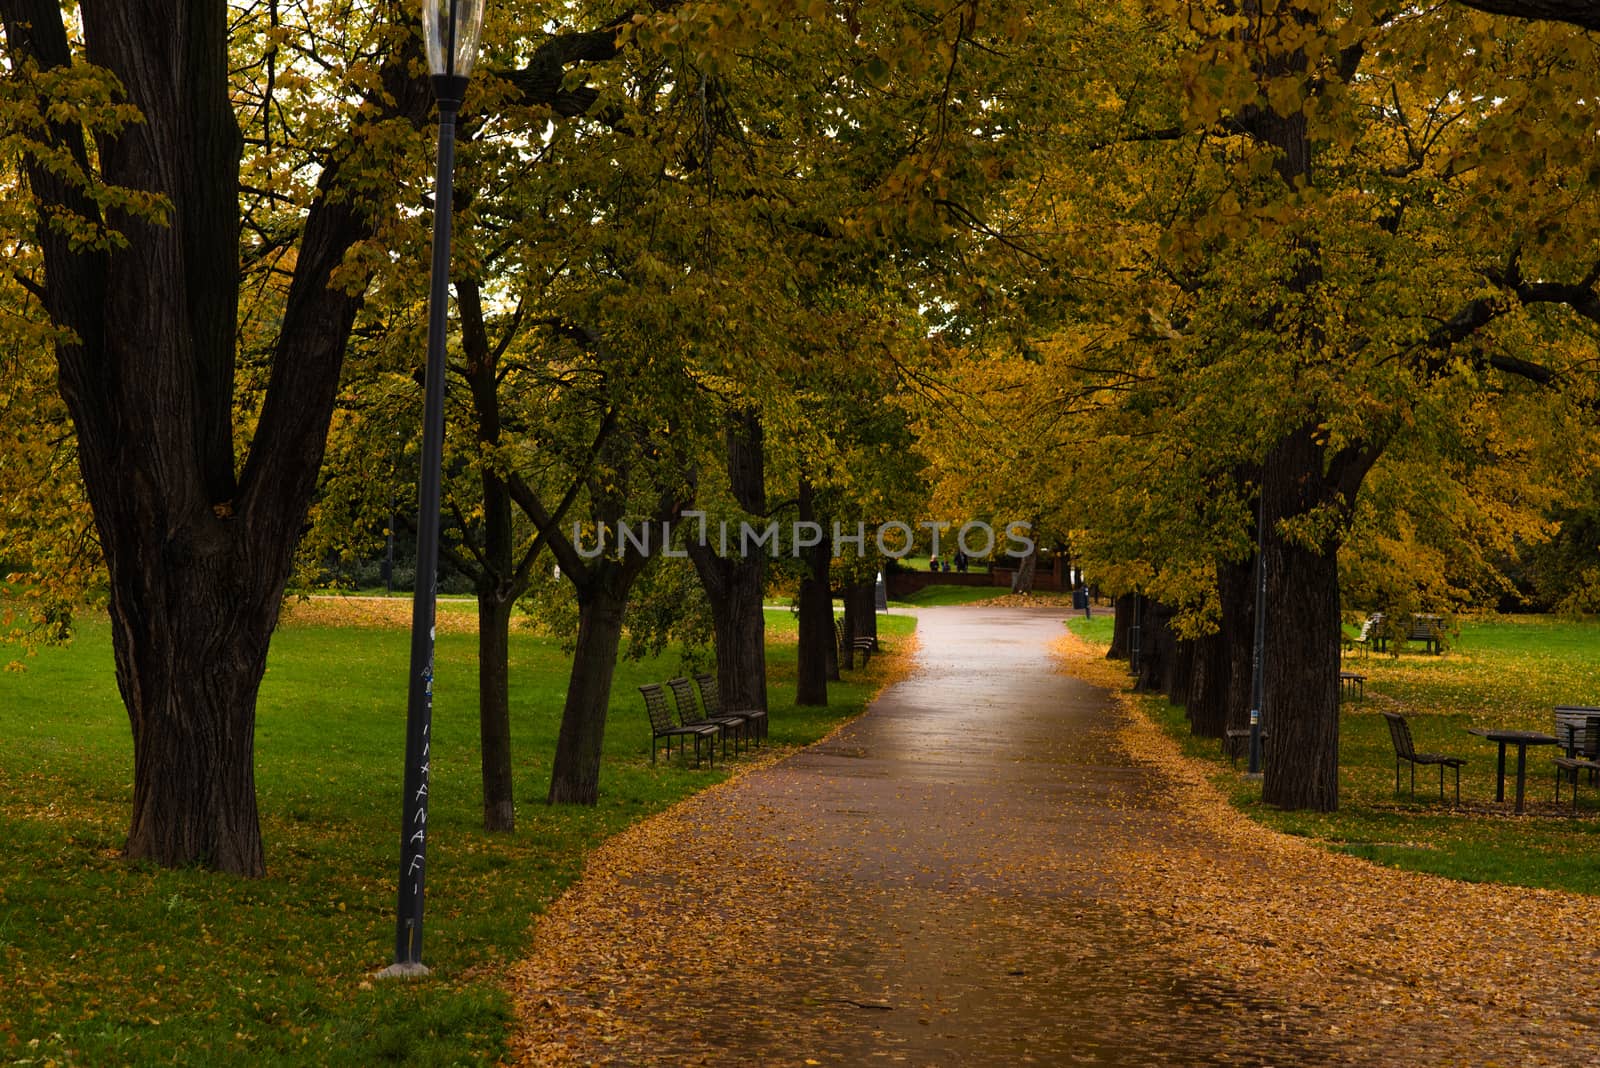 A colorful path in the park with yellow leaves